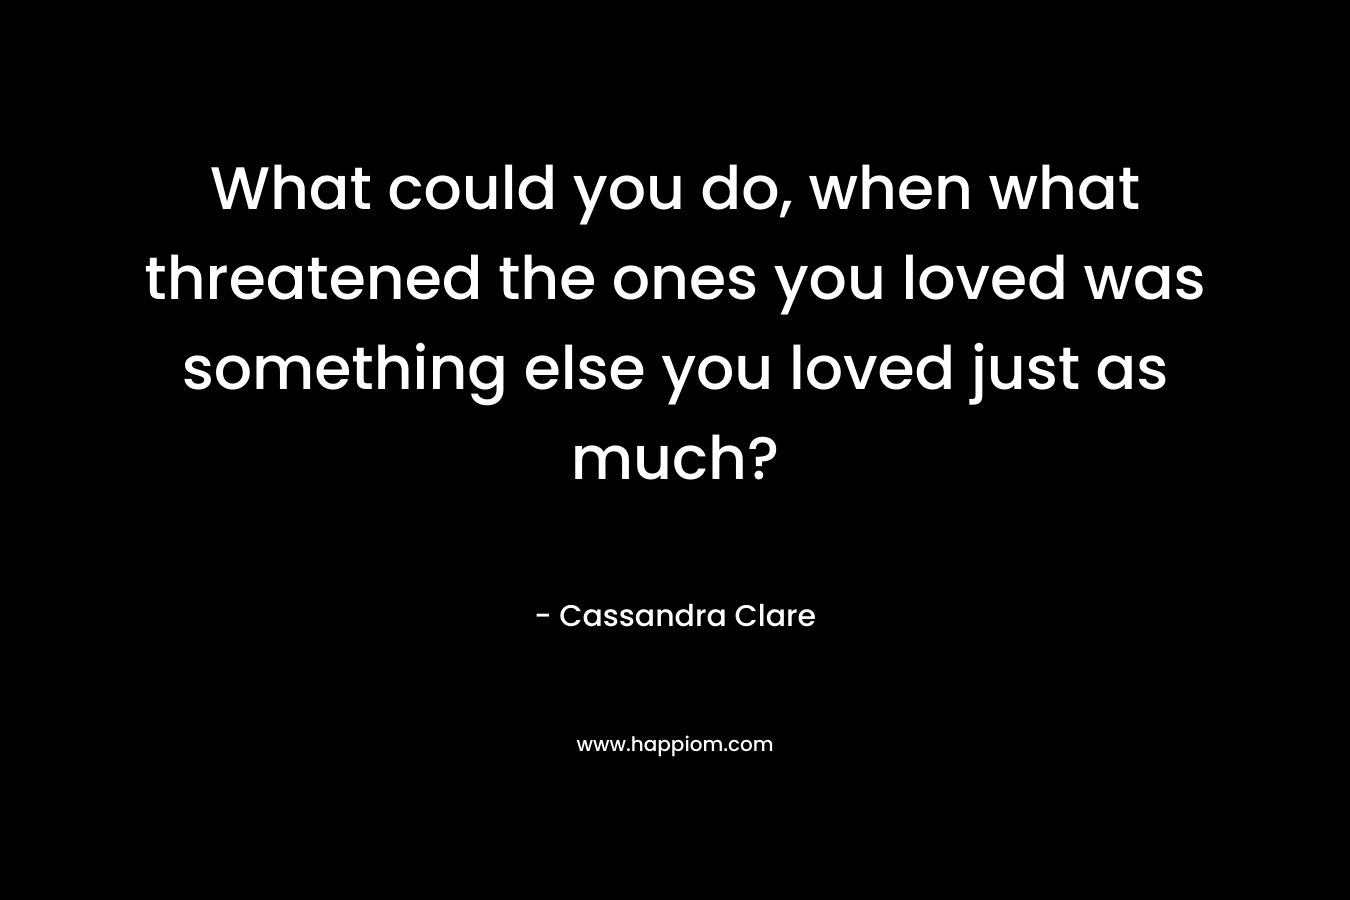 What could you do, when what threatened the ones you loved was something else you loved just as much?